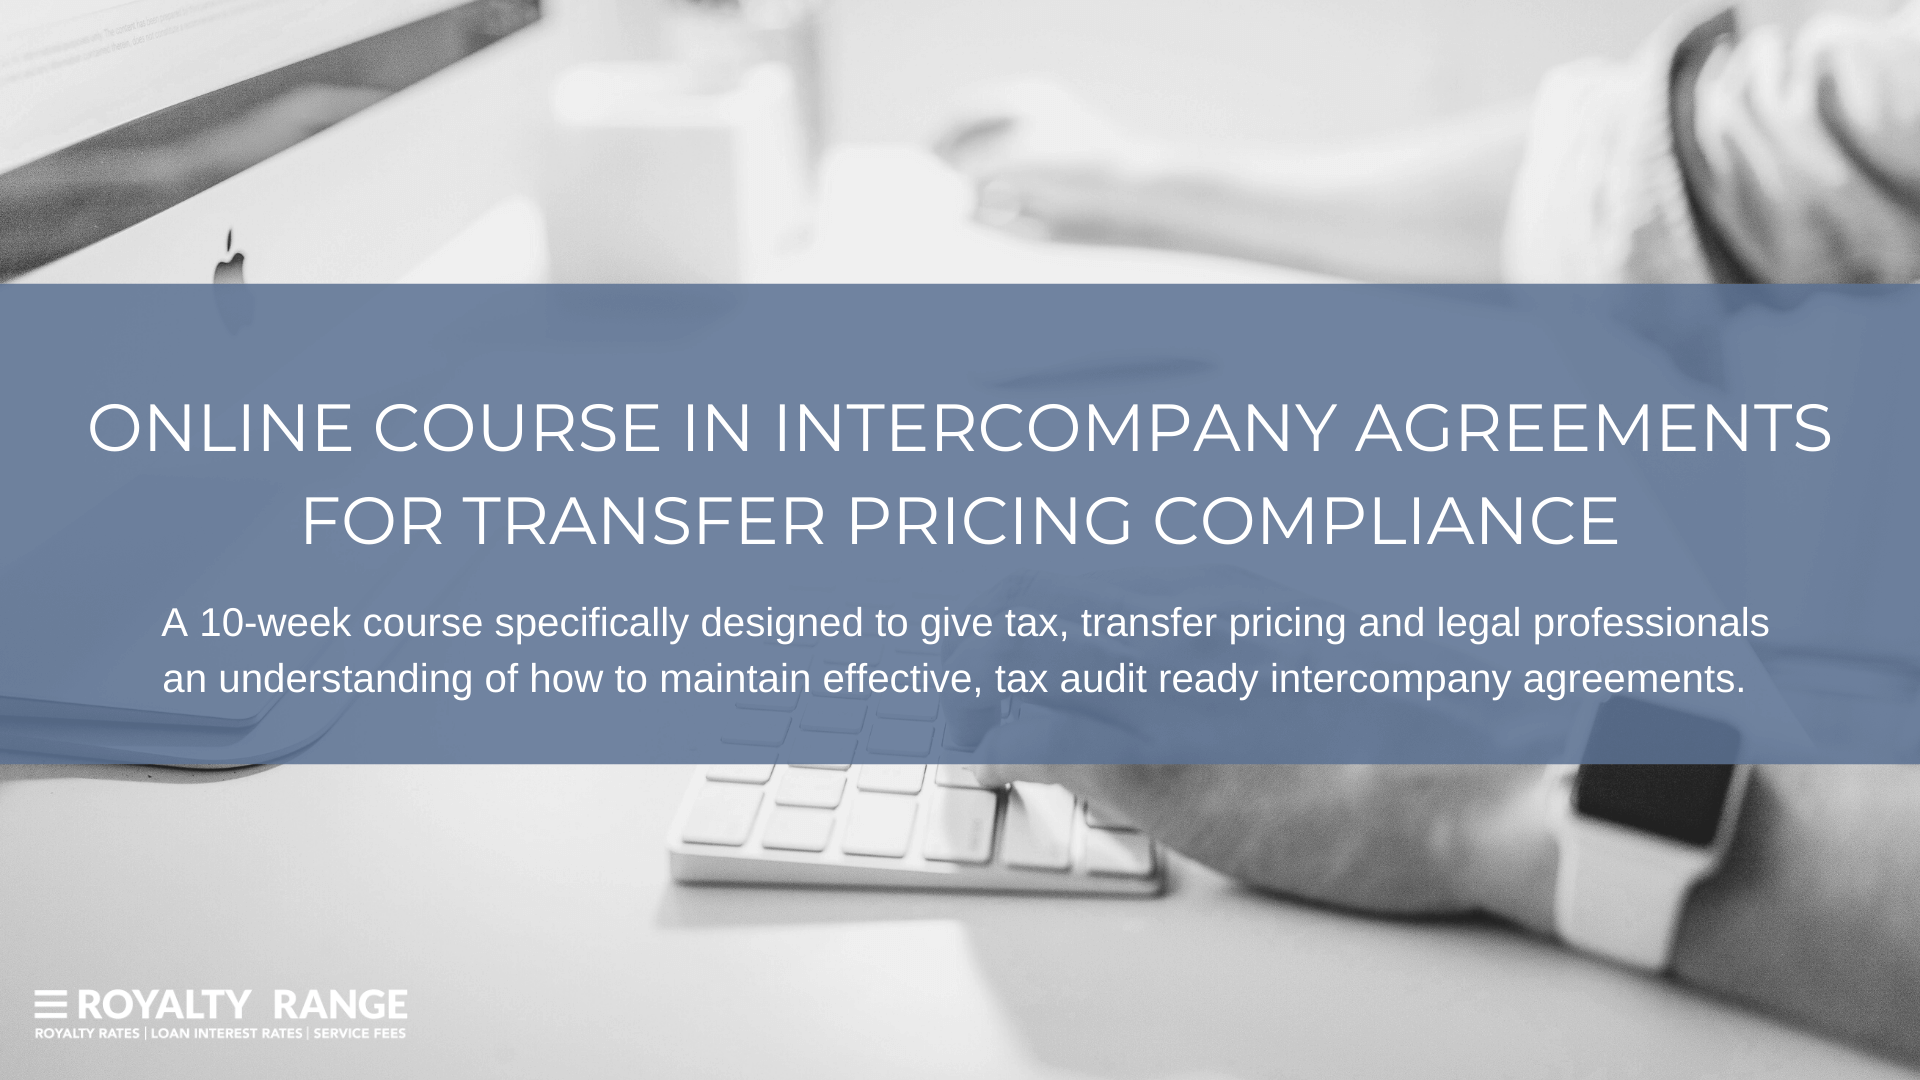 Online Course in Intercompany Agreements for Transfer Pricing Compliance